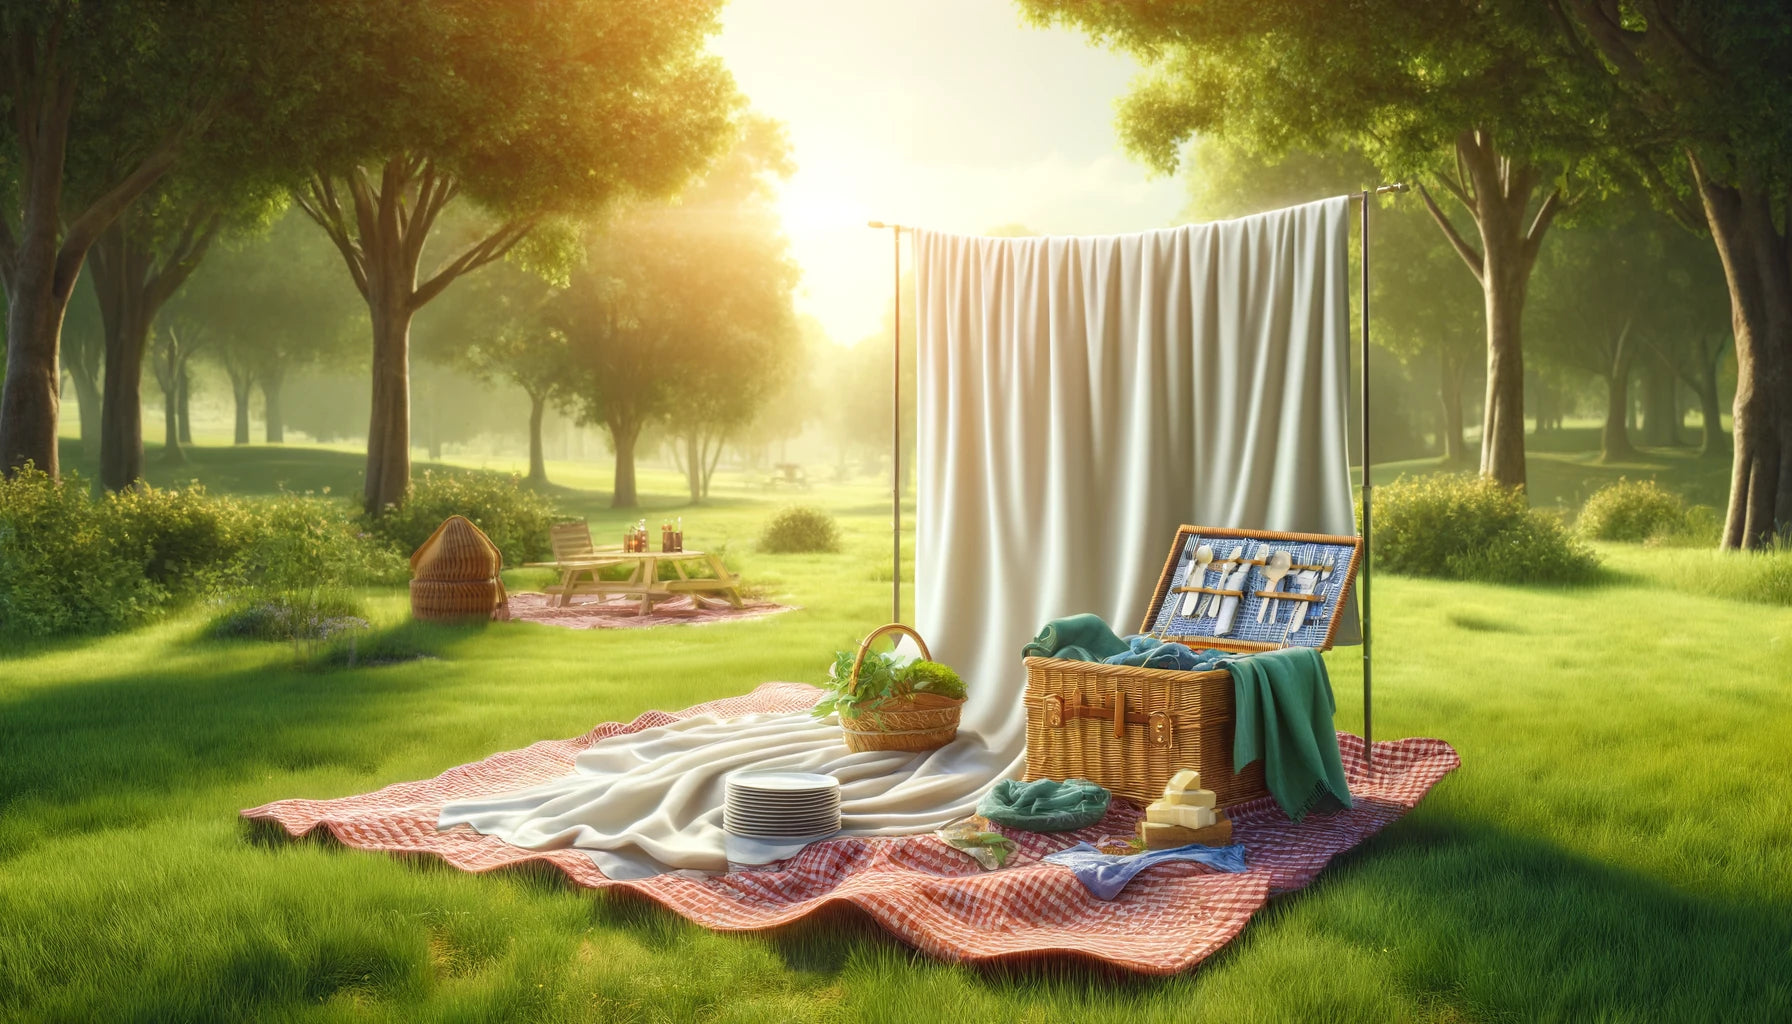 How to Wash Picnic Blanket: A Guide to Keeping It Fresh